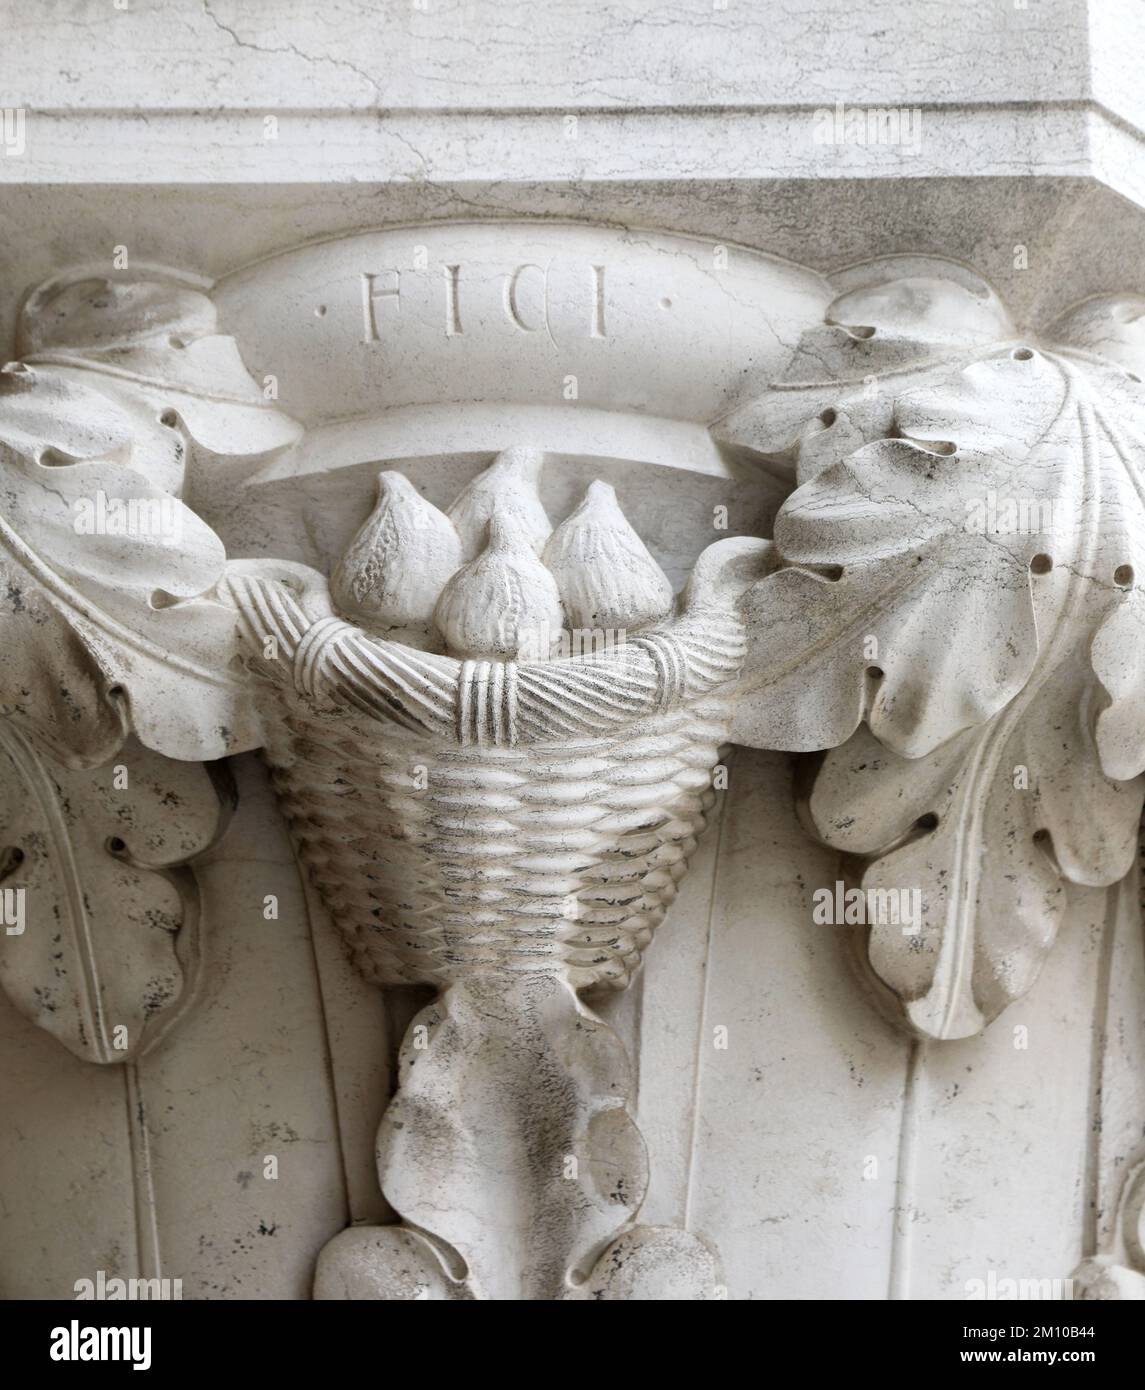 Sculpture with the writing FICI which means FIGS in Venetian dialect in Venice on a column of the Doge's Palace Stock Photo